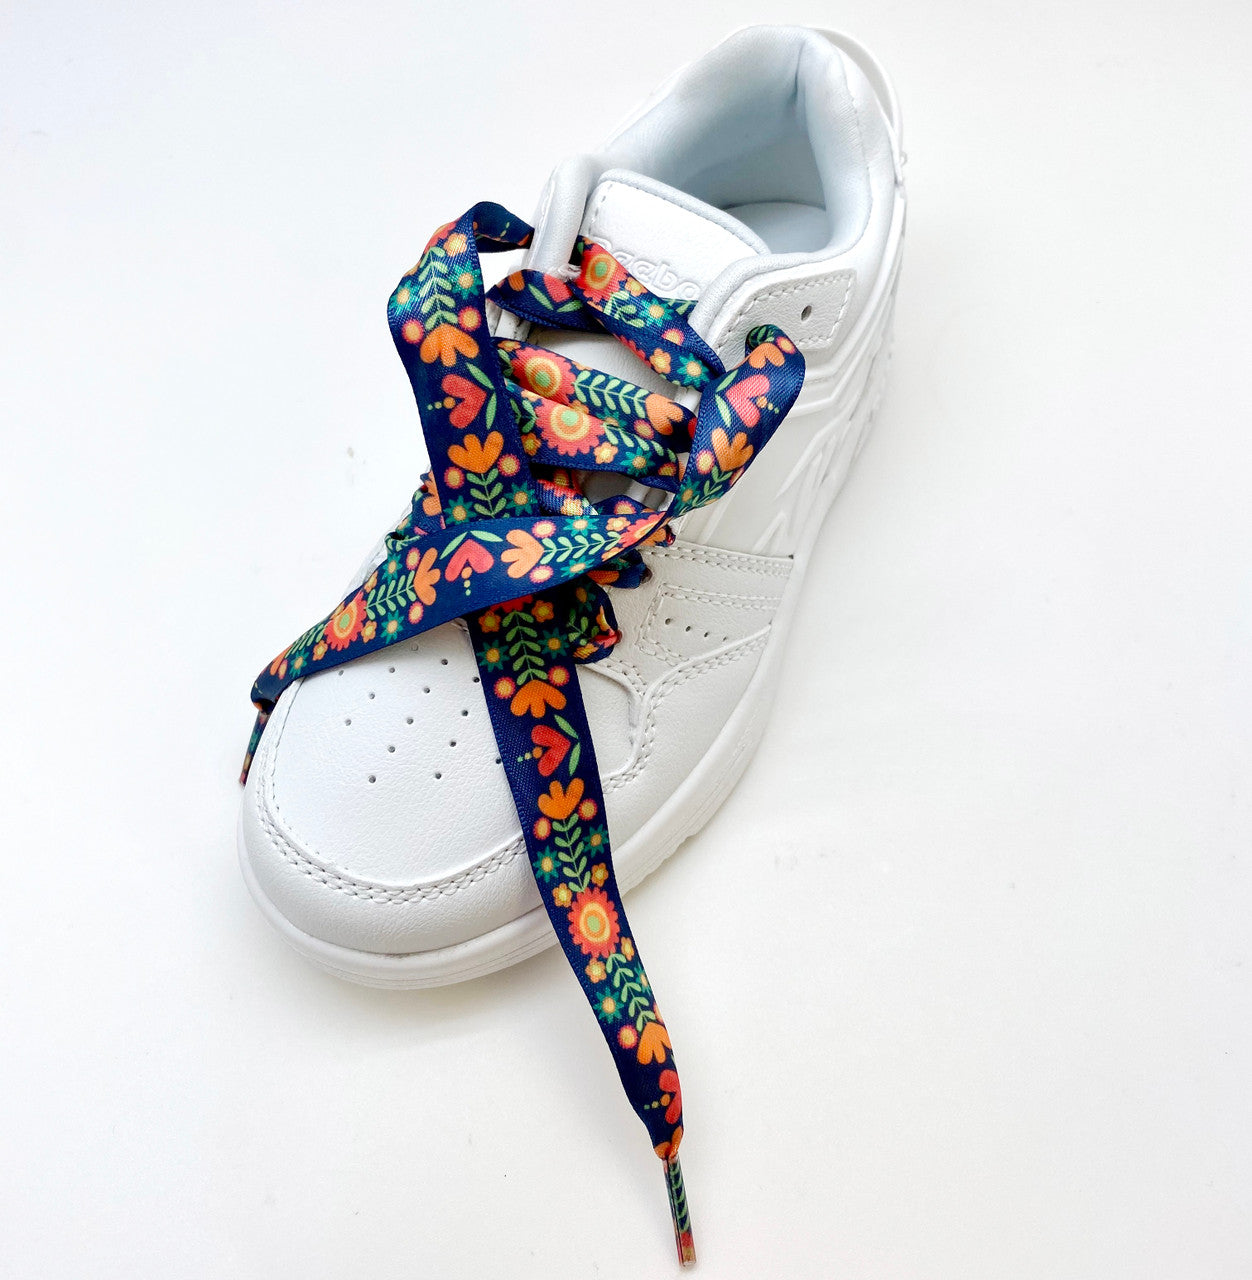 Satin Shoelaces boho floral print ideal for hip hop dance, dance team, sneaker junkie, cheerleading, wedding, prom in 36" and 44" lengths